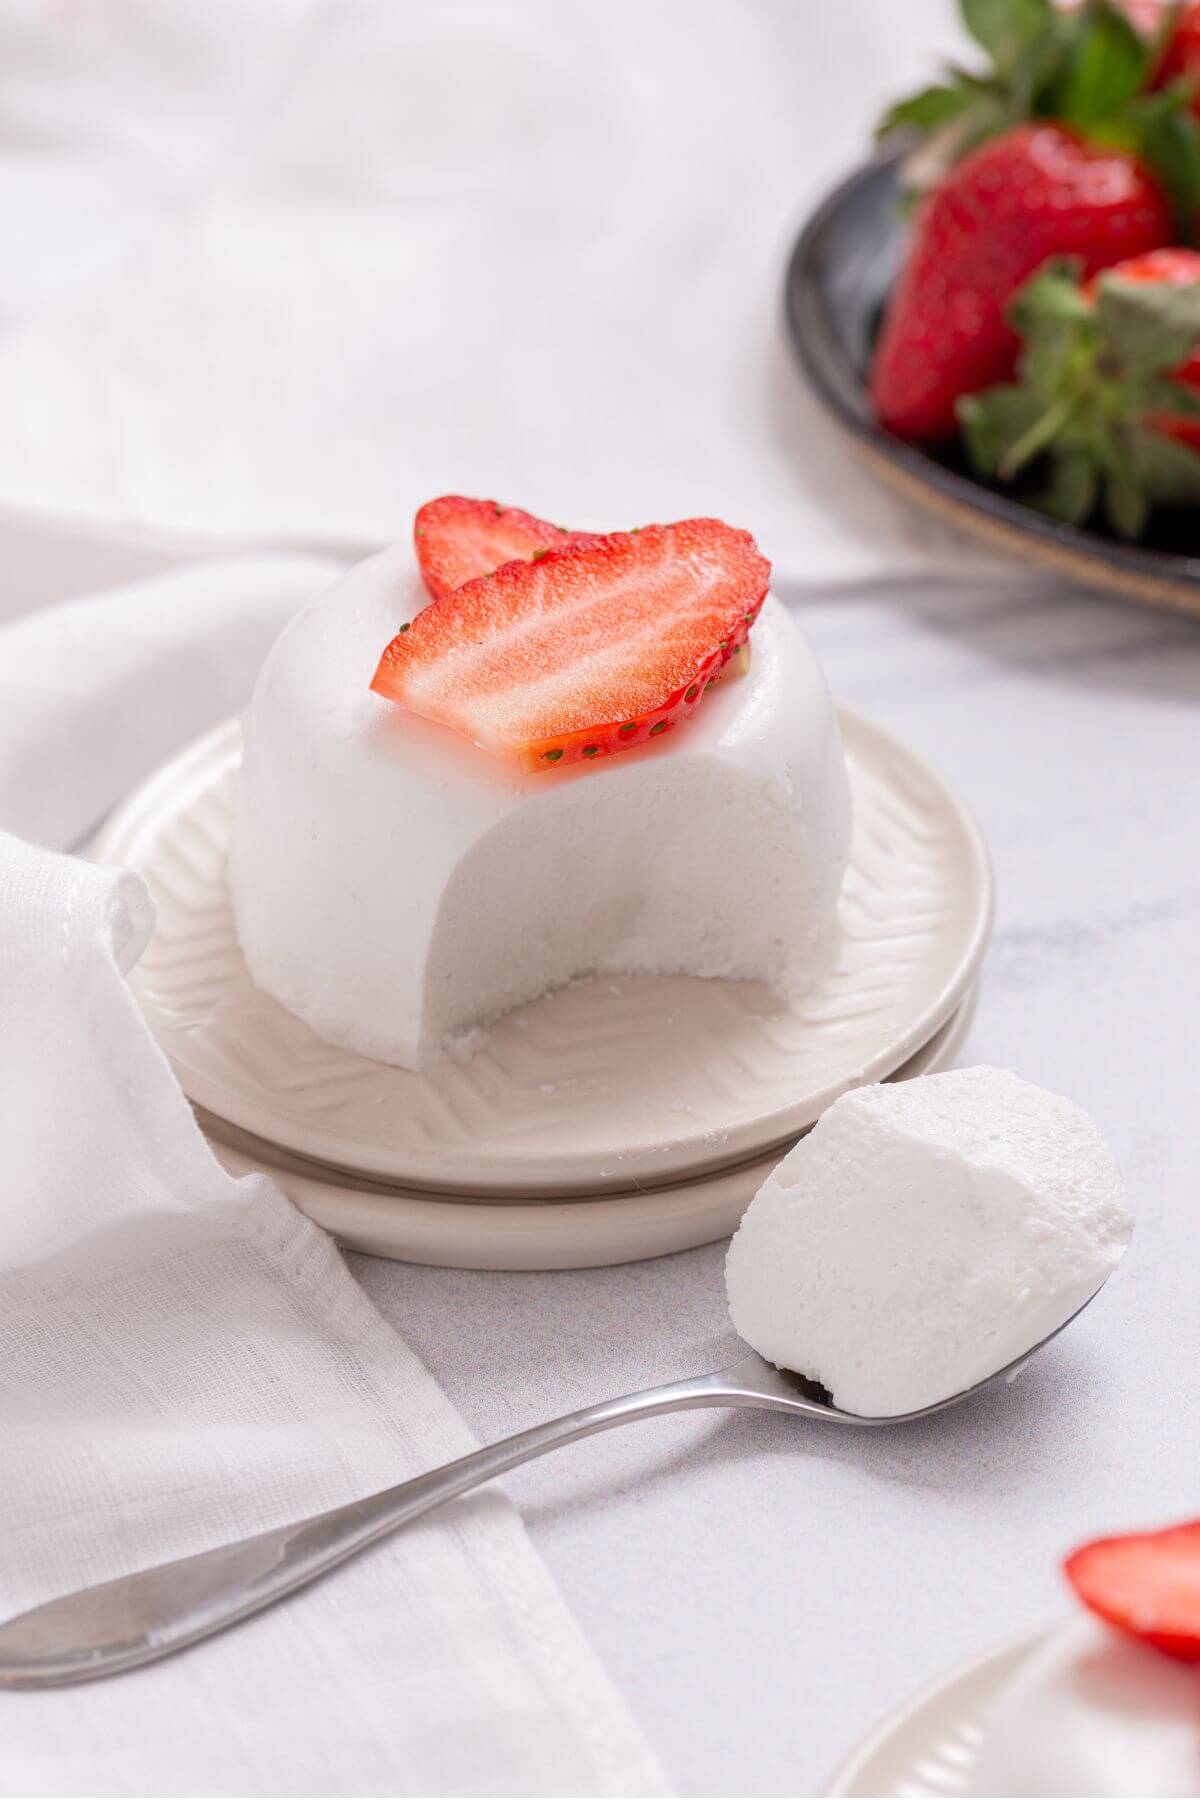 A coconut panna cotta with strawberries on a plate.